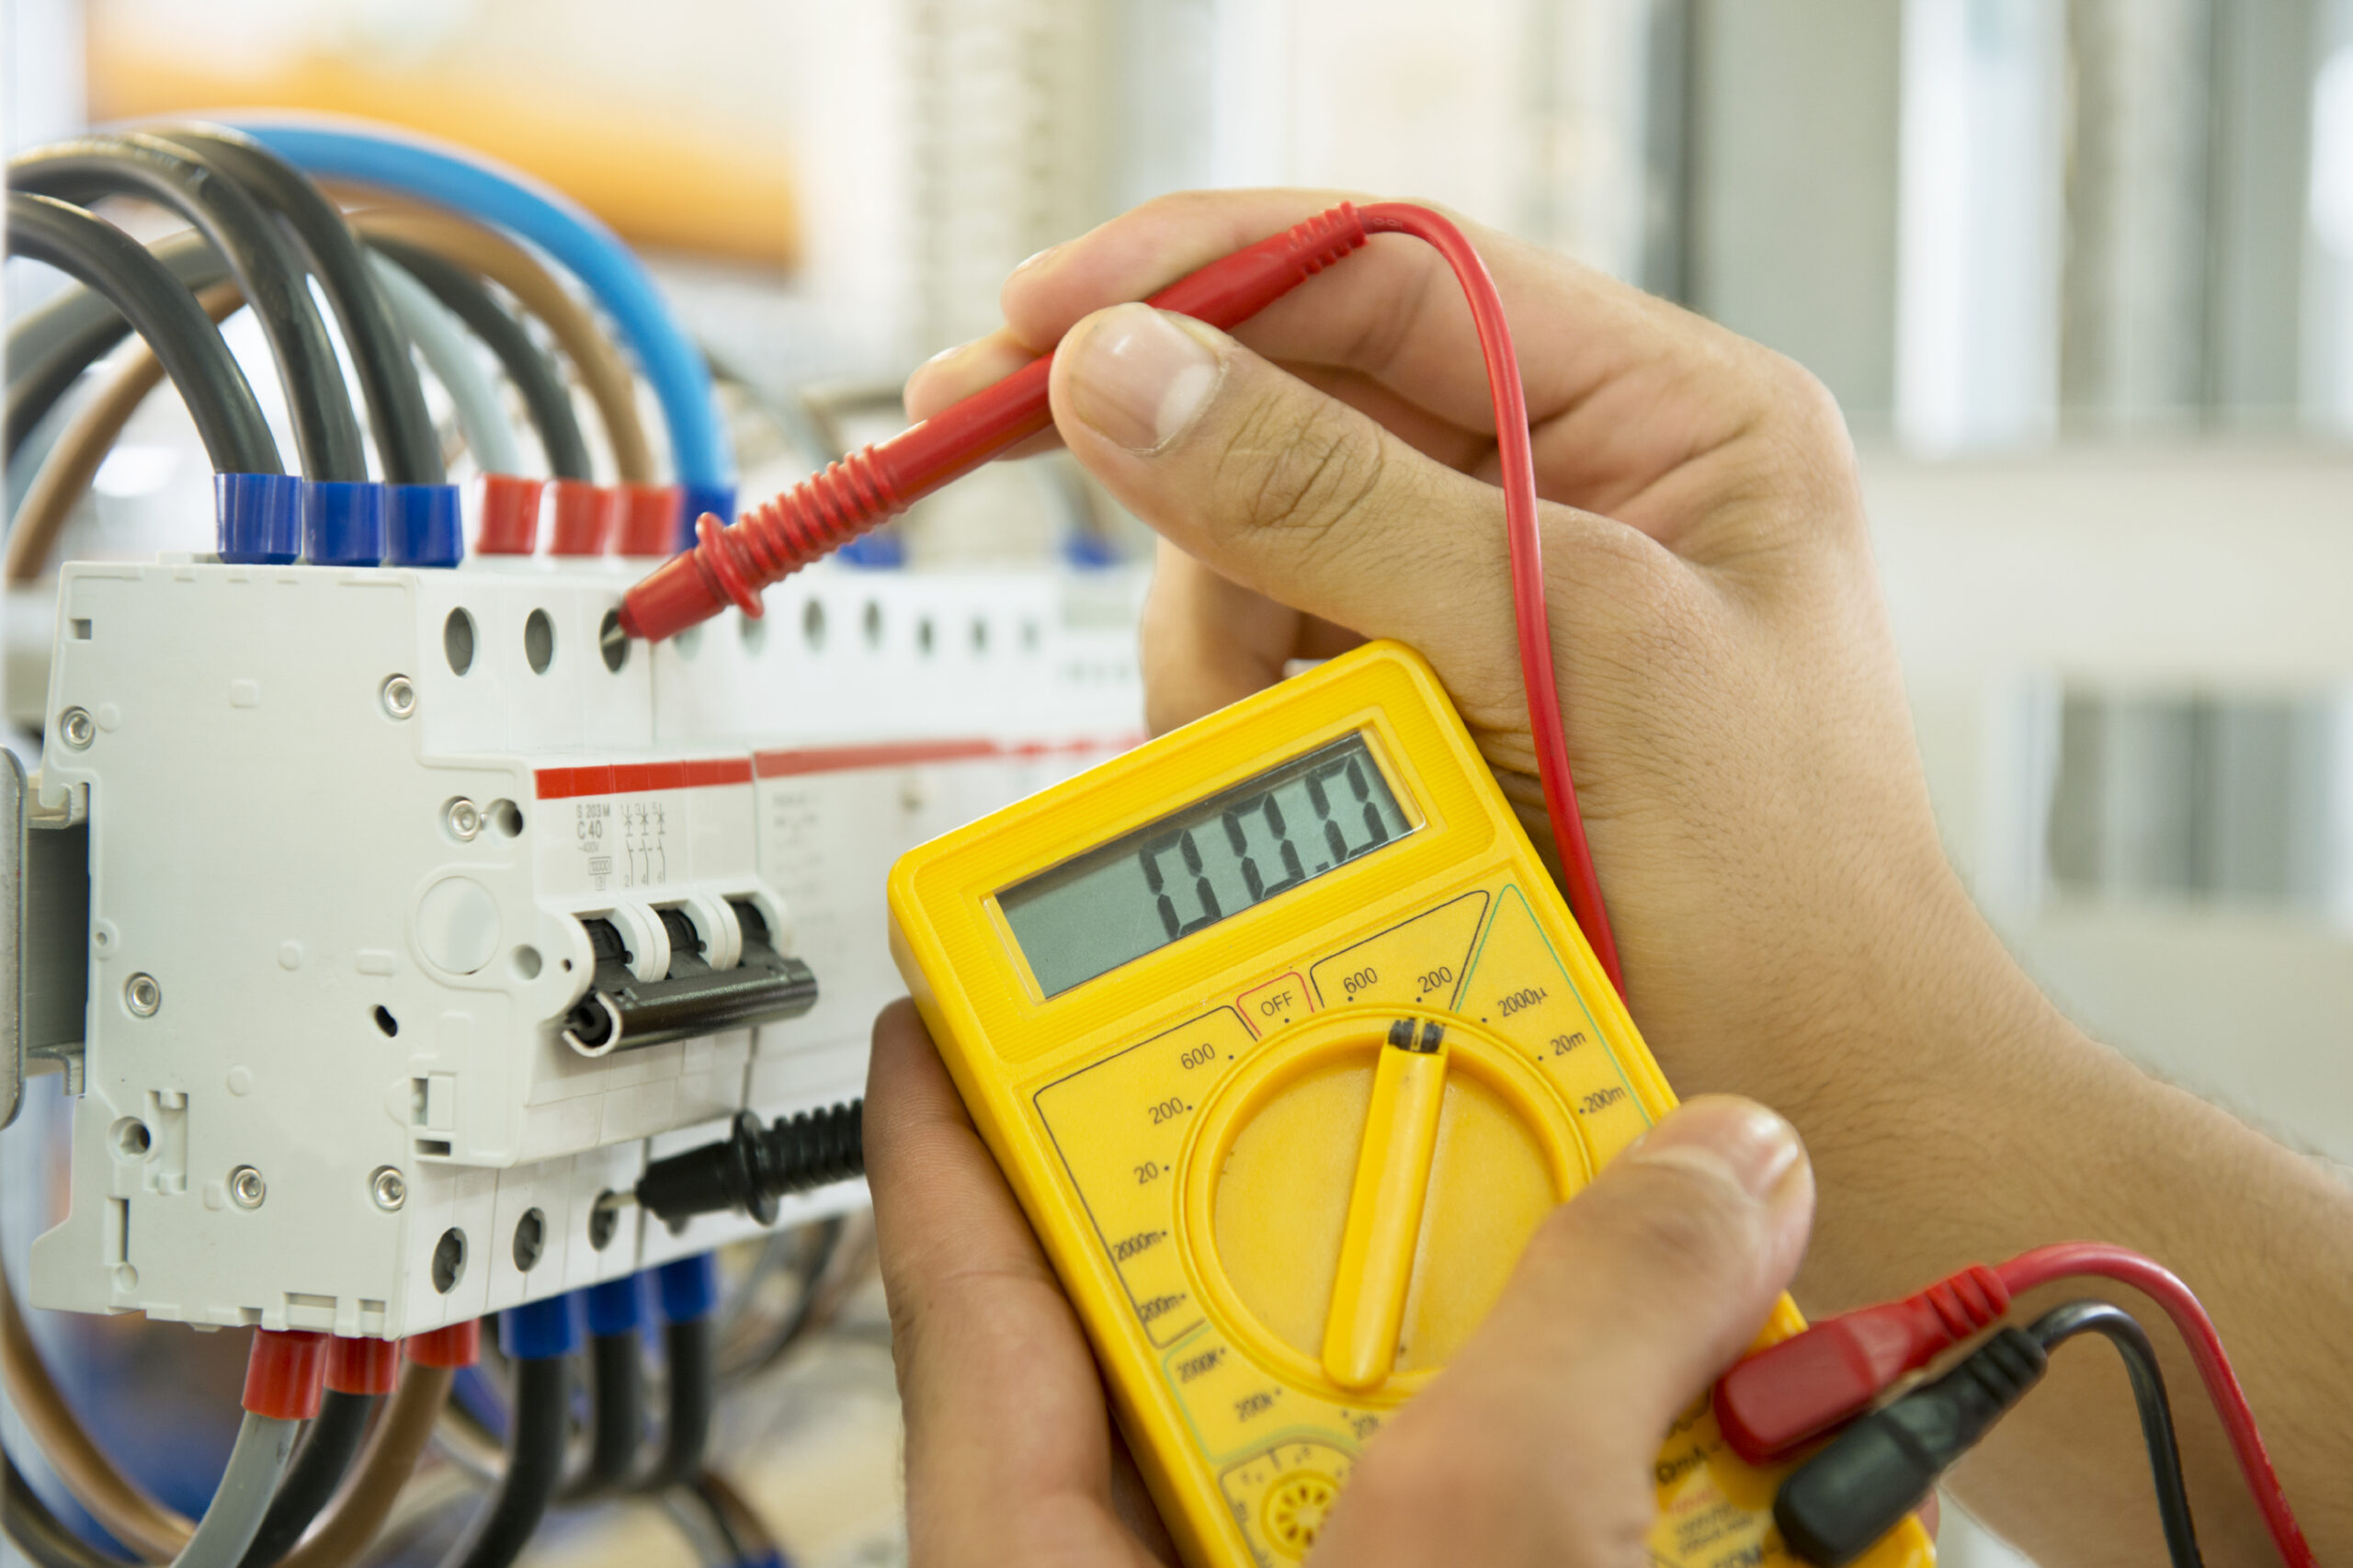 Electrician Faulty finding on power failure